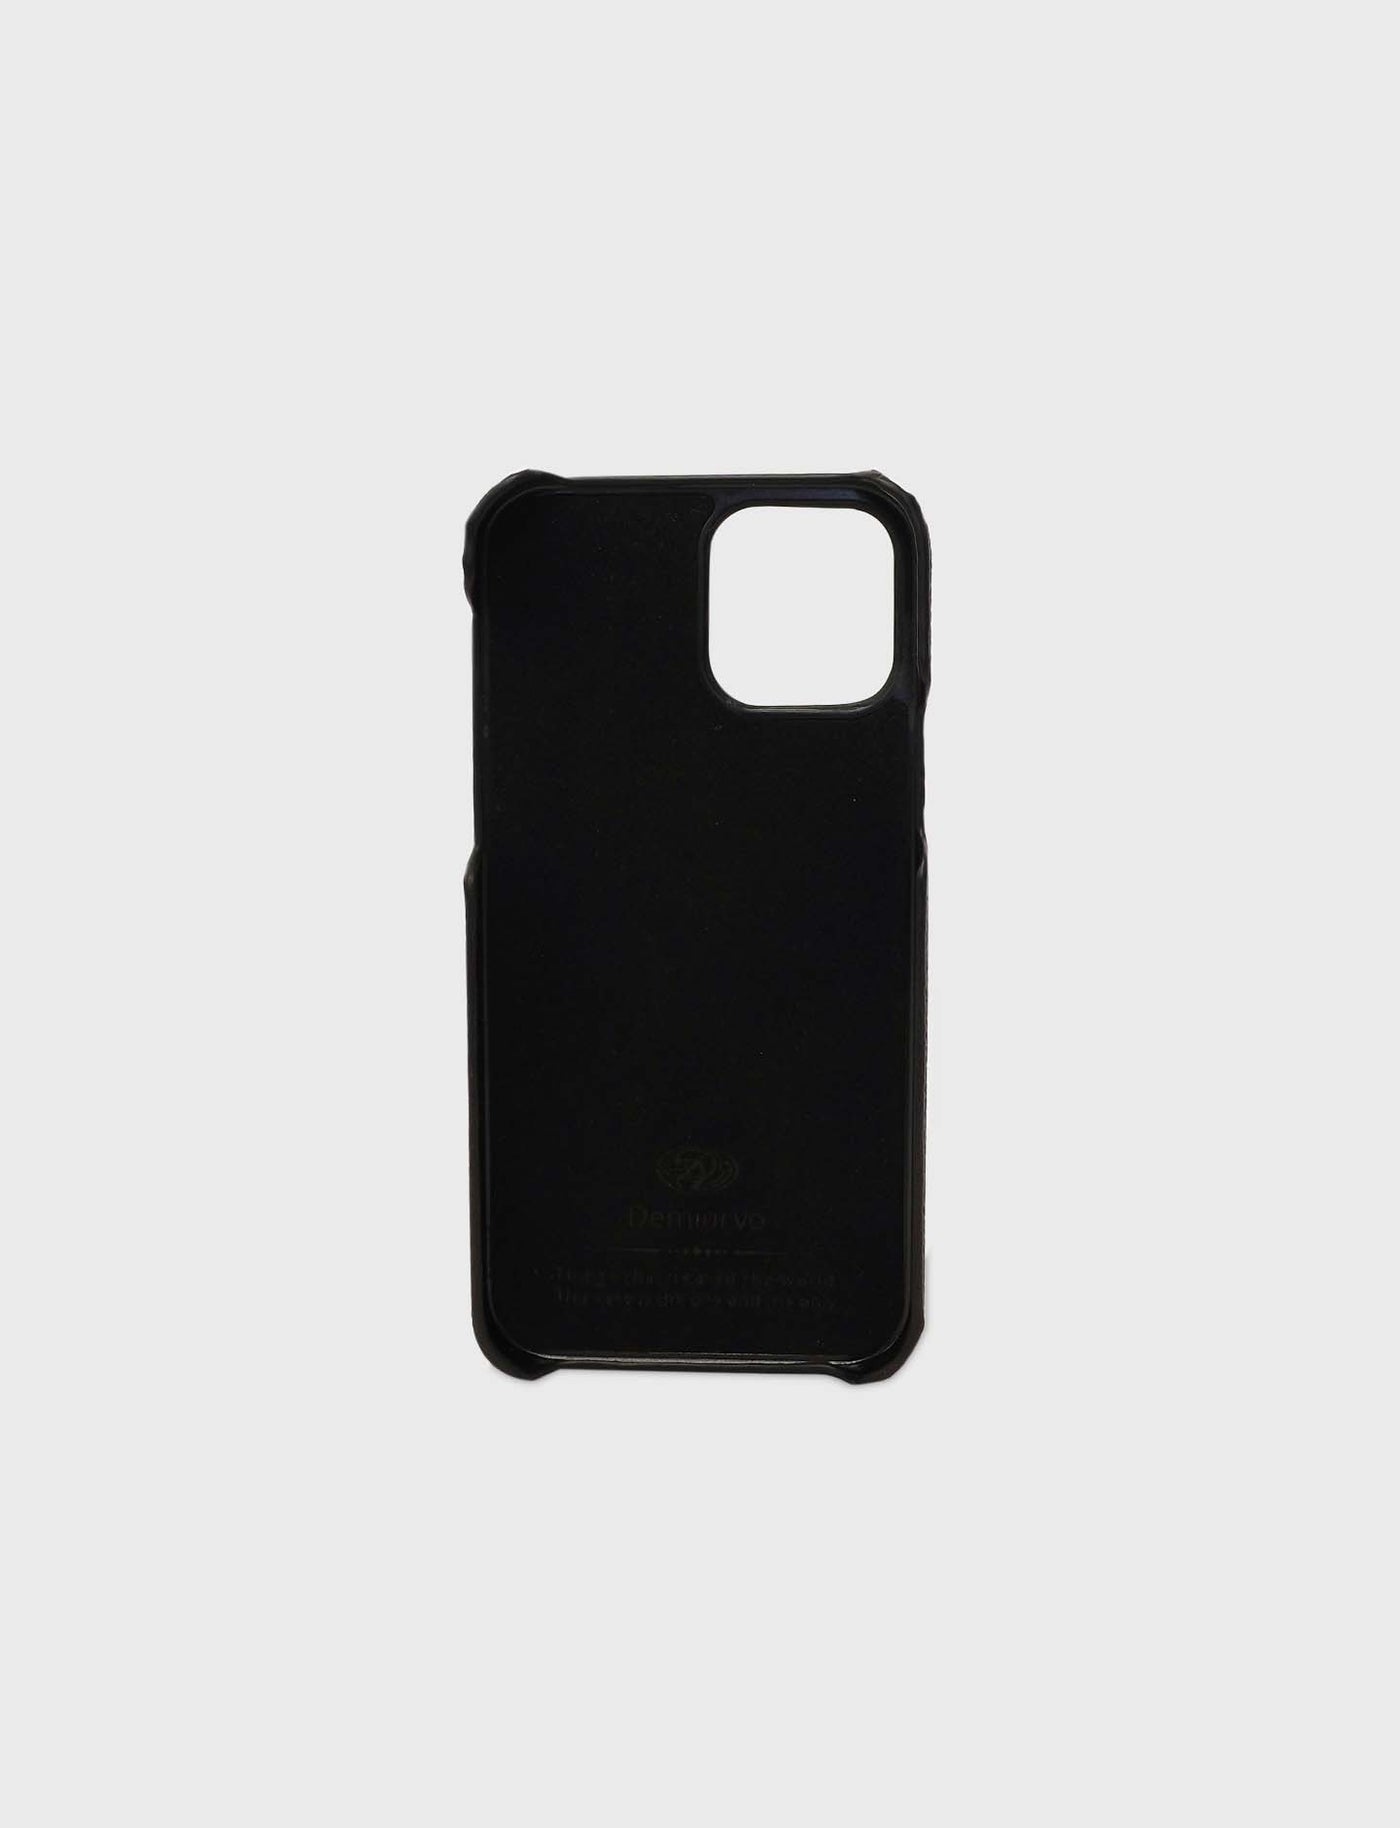 CHATEAUBRIAND iPhone case for 12/12pro